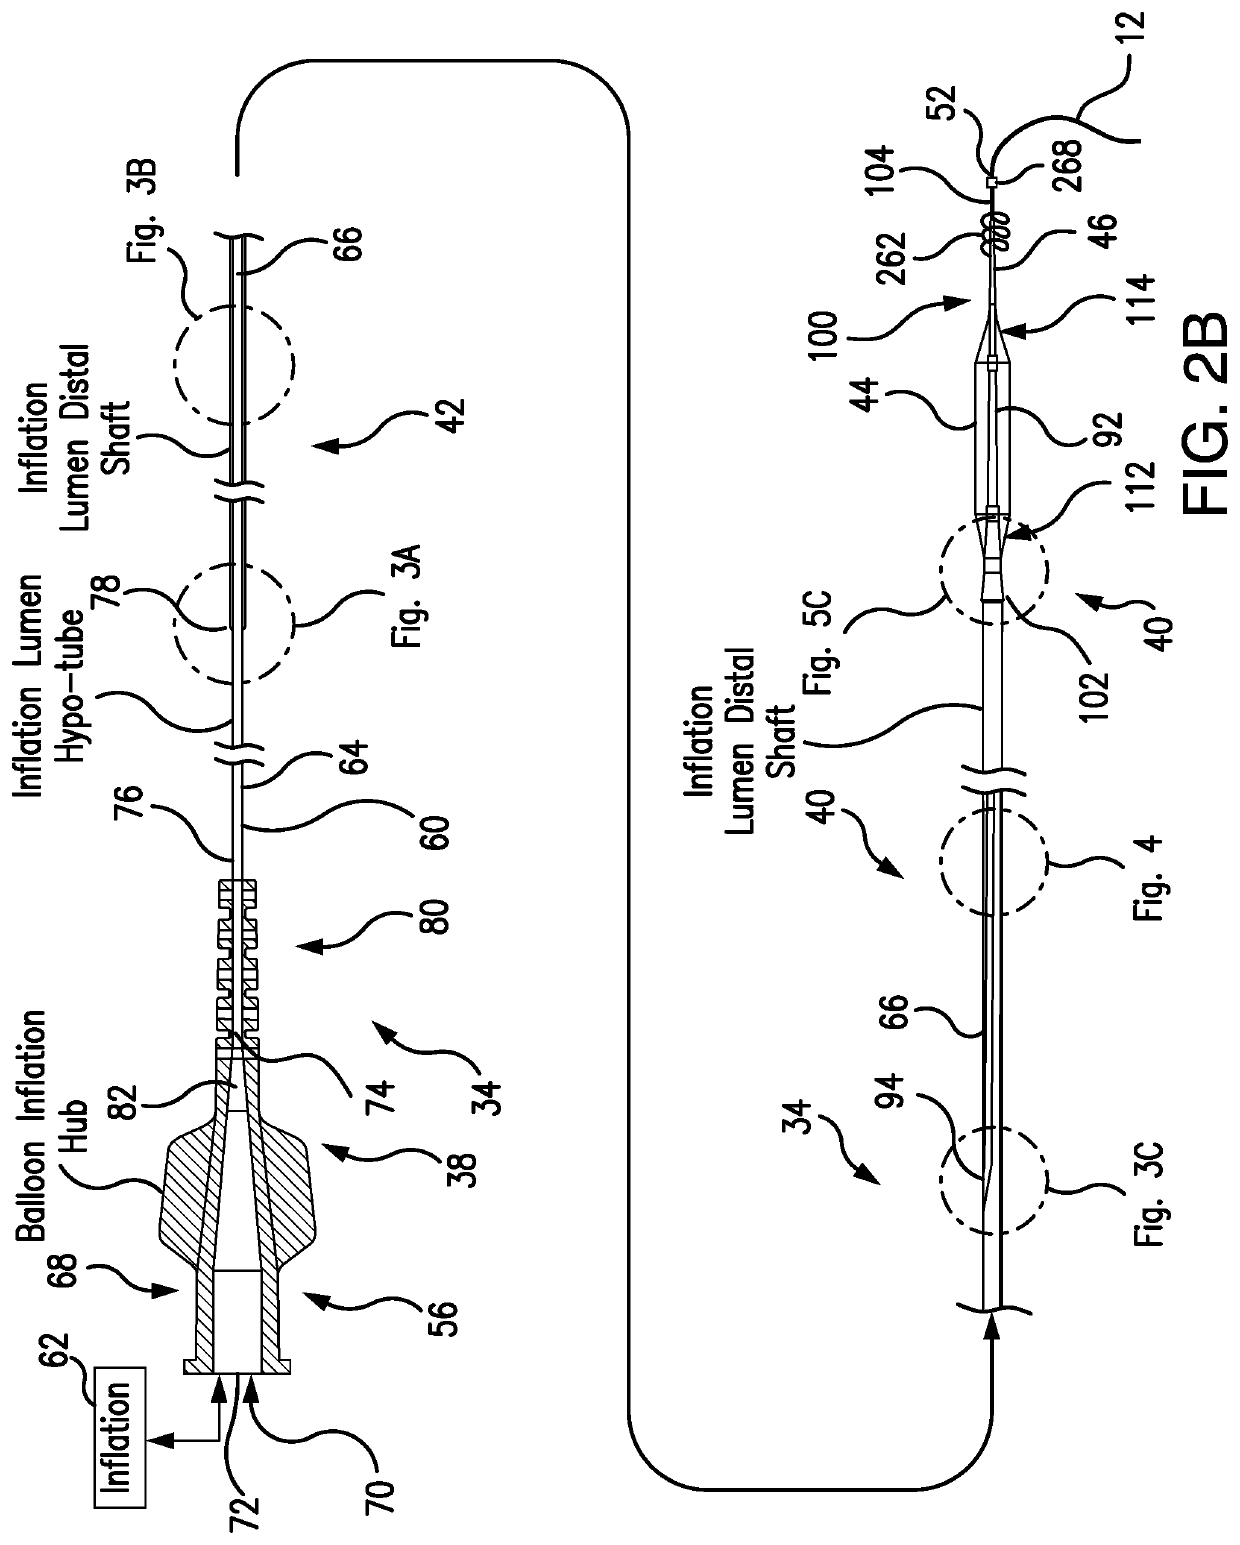 Intravascular delivery system and method for percutaneous coronary intervention